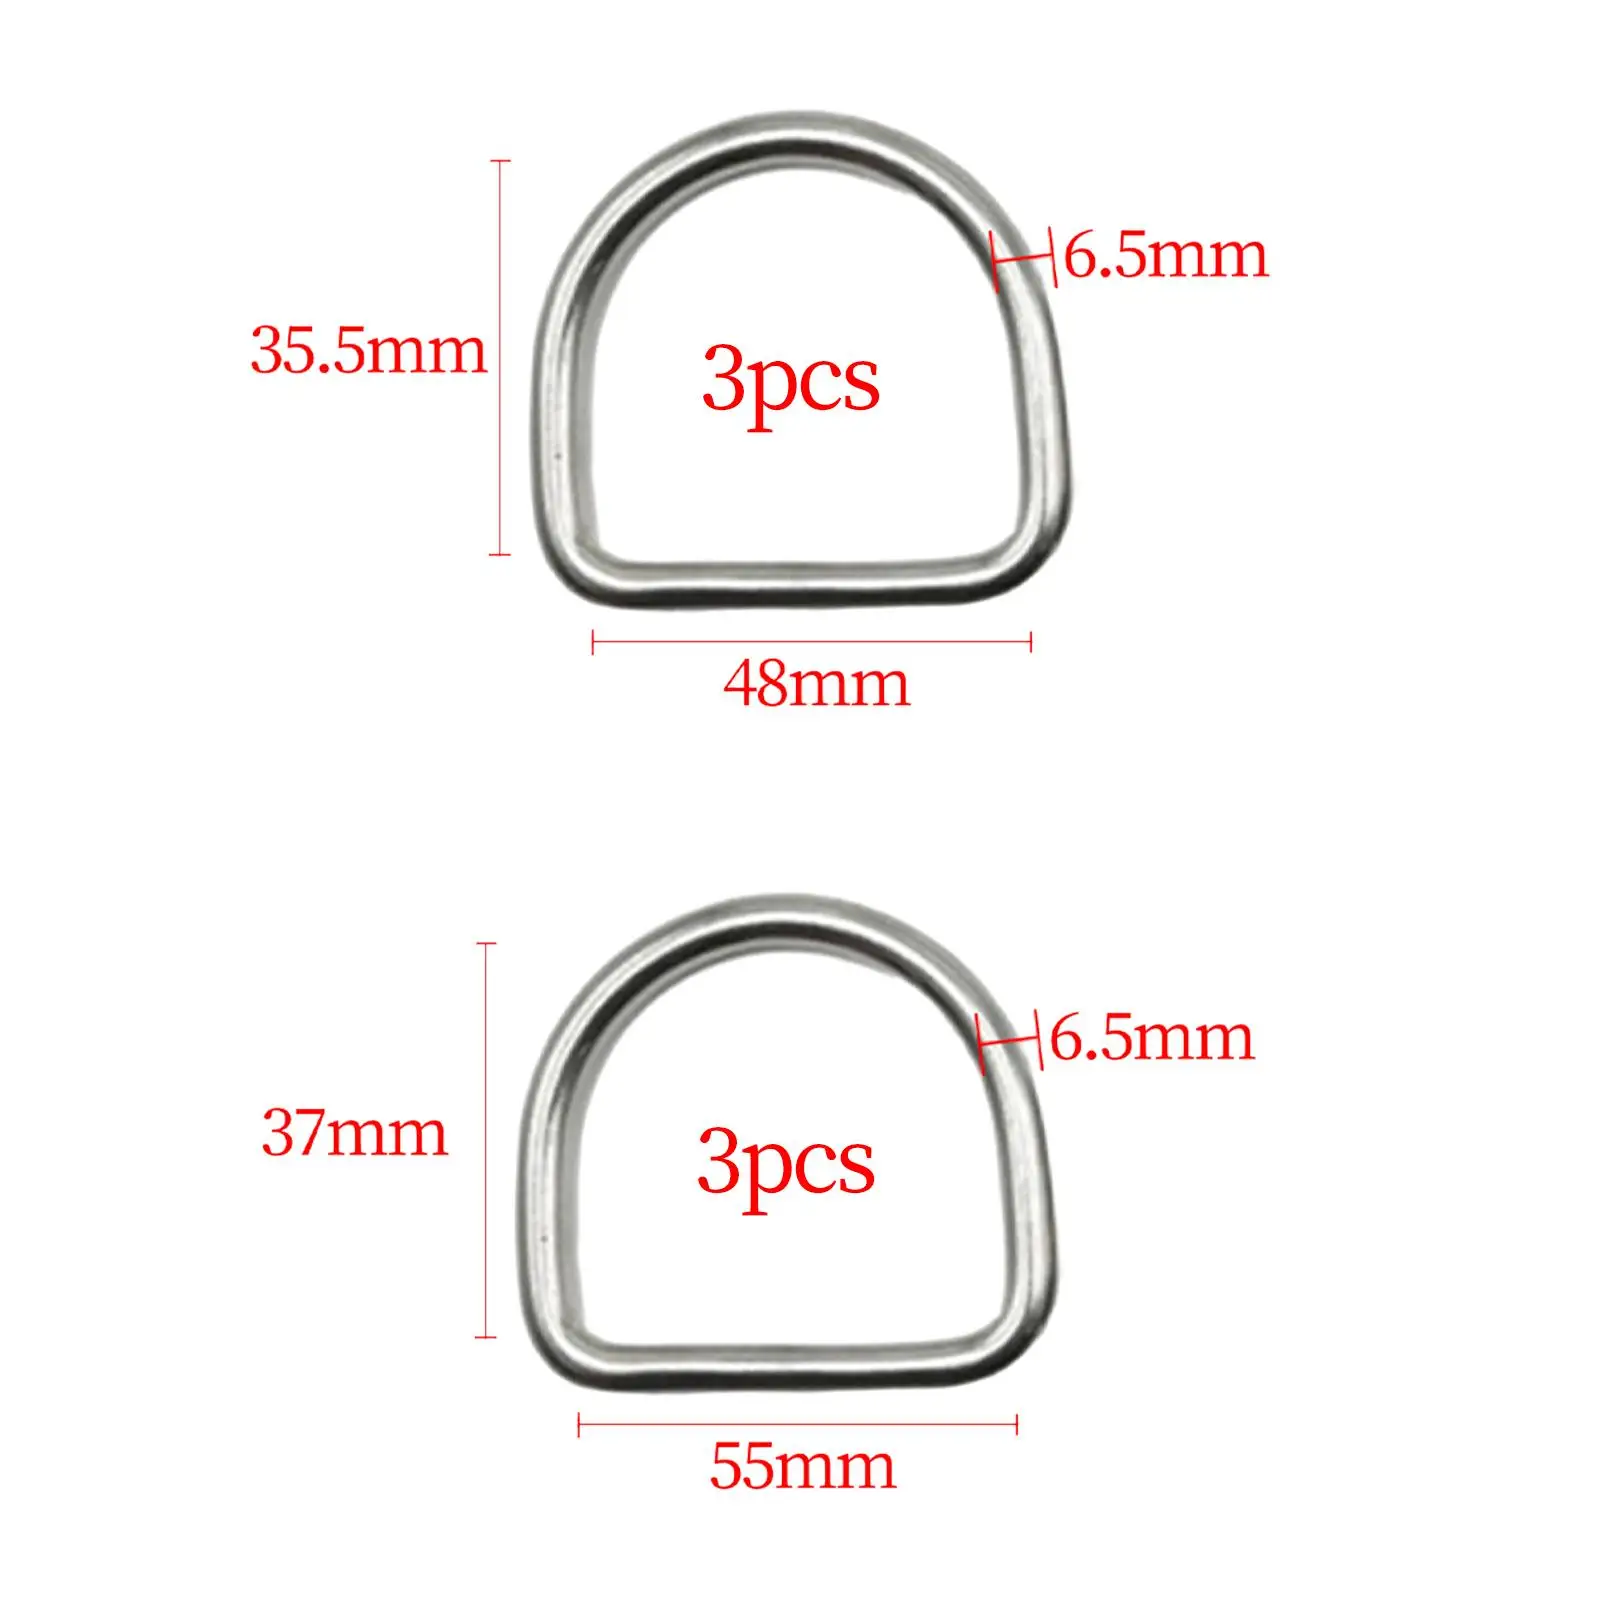 3 Pieces Metal D Ring Sturdy Fasteners for Harnesses Dog Collars Backpacks